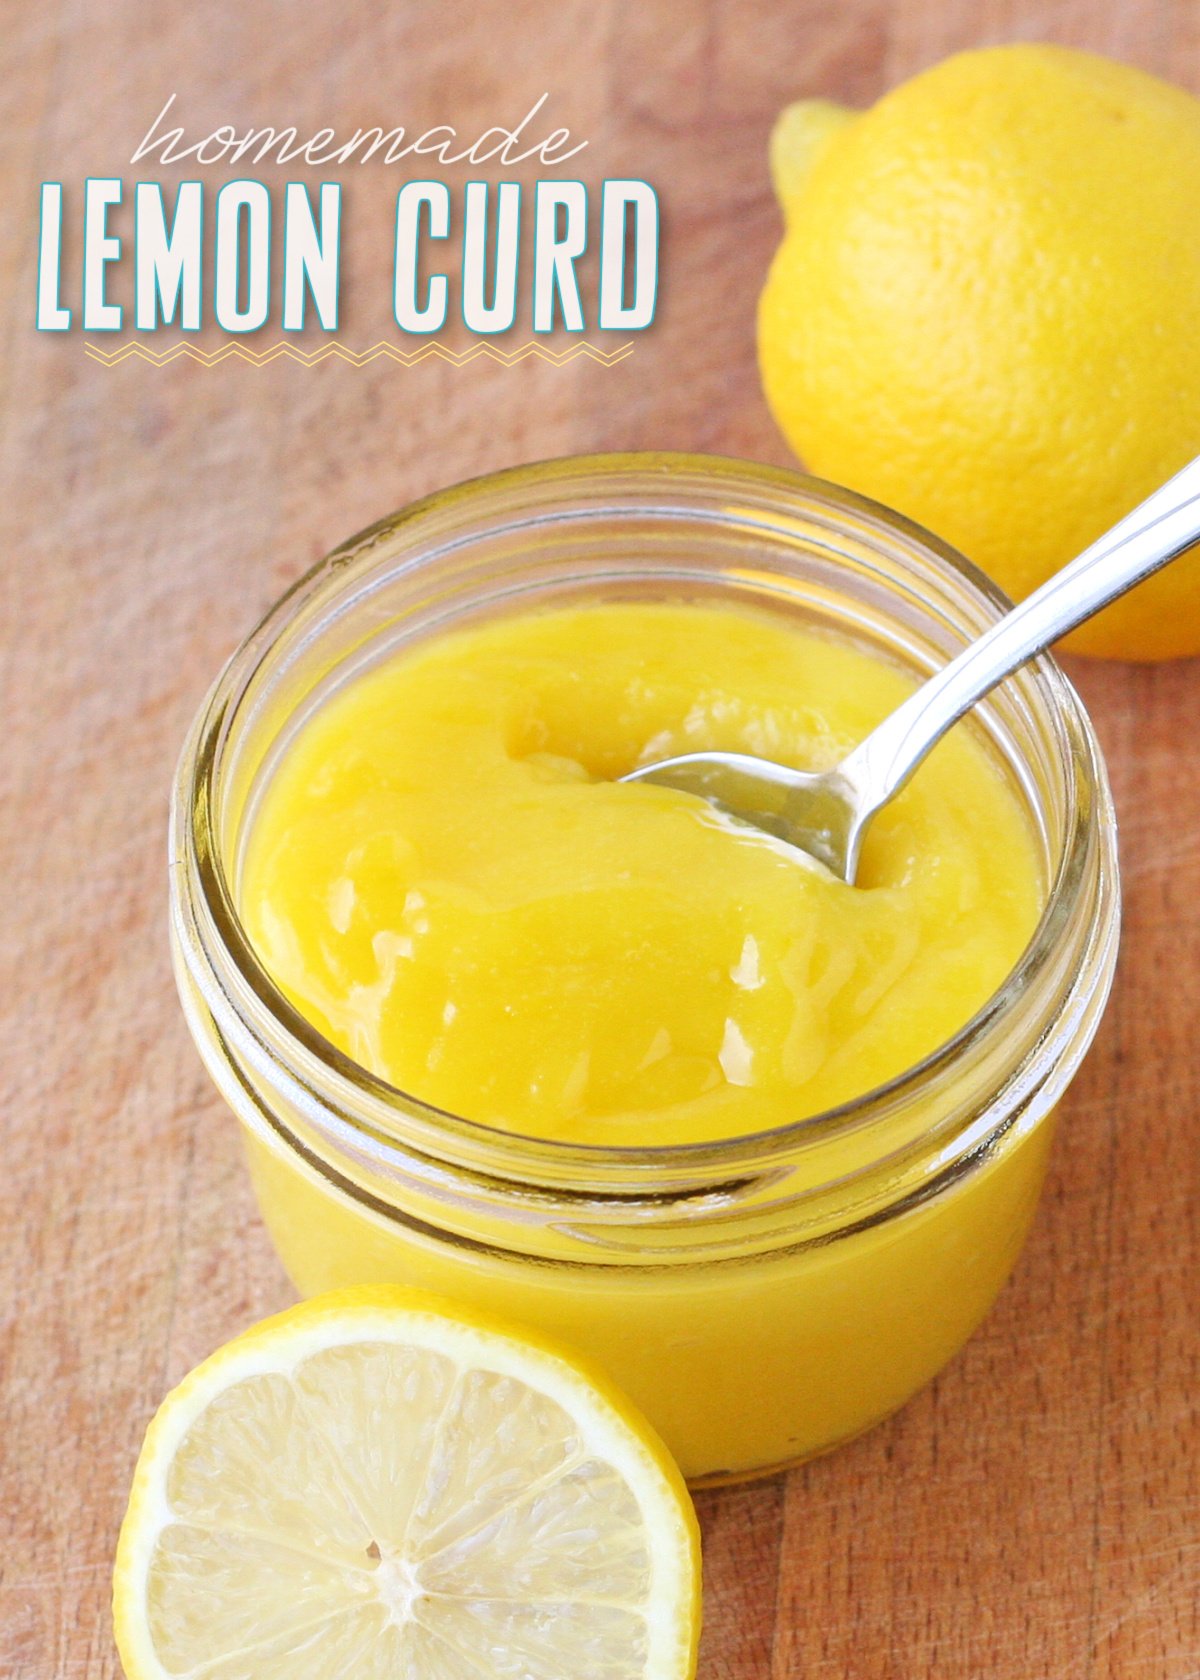 hoememade lemon curd in small glass jar with fresh lemon slices and spoon in jar title overlay